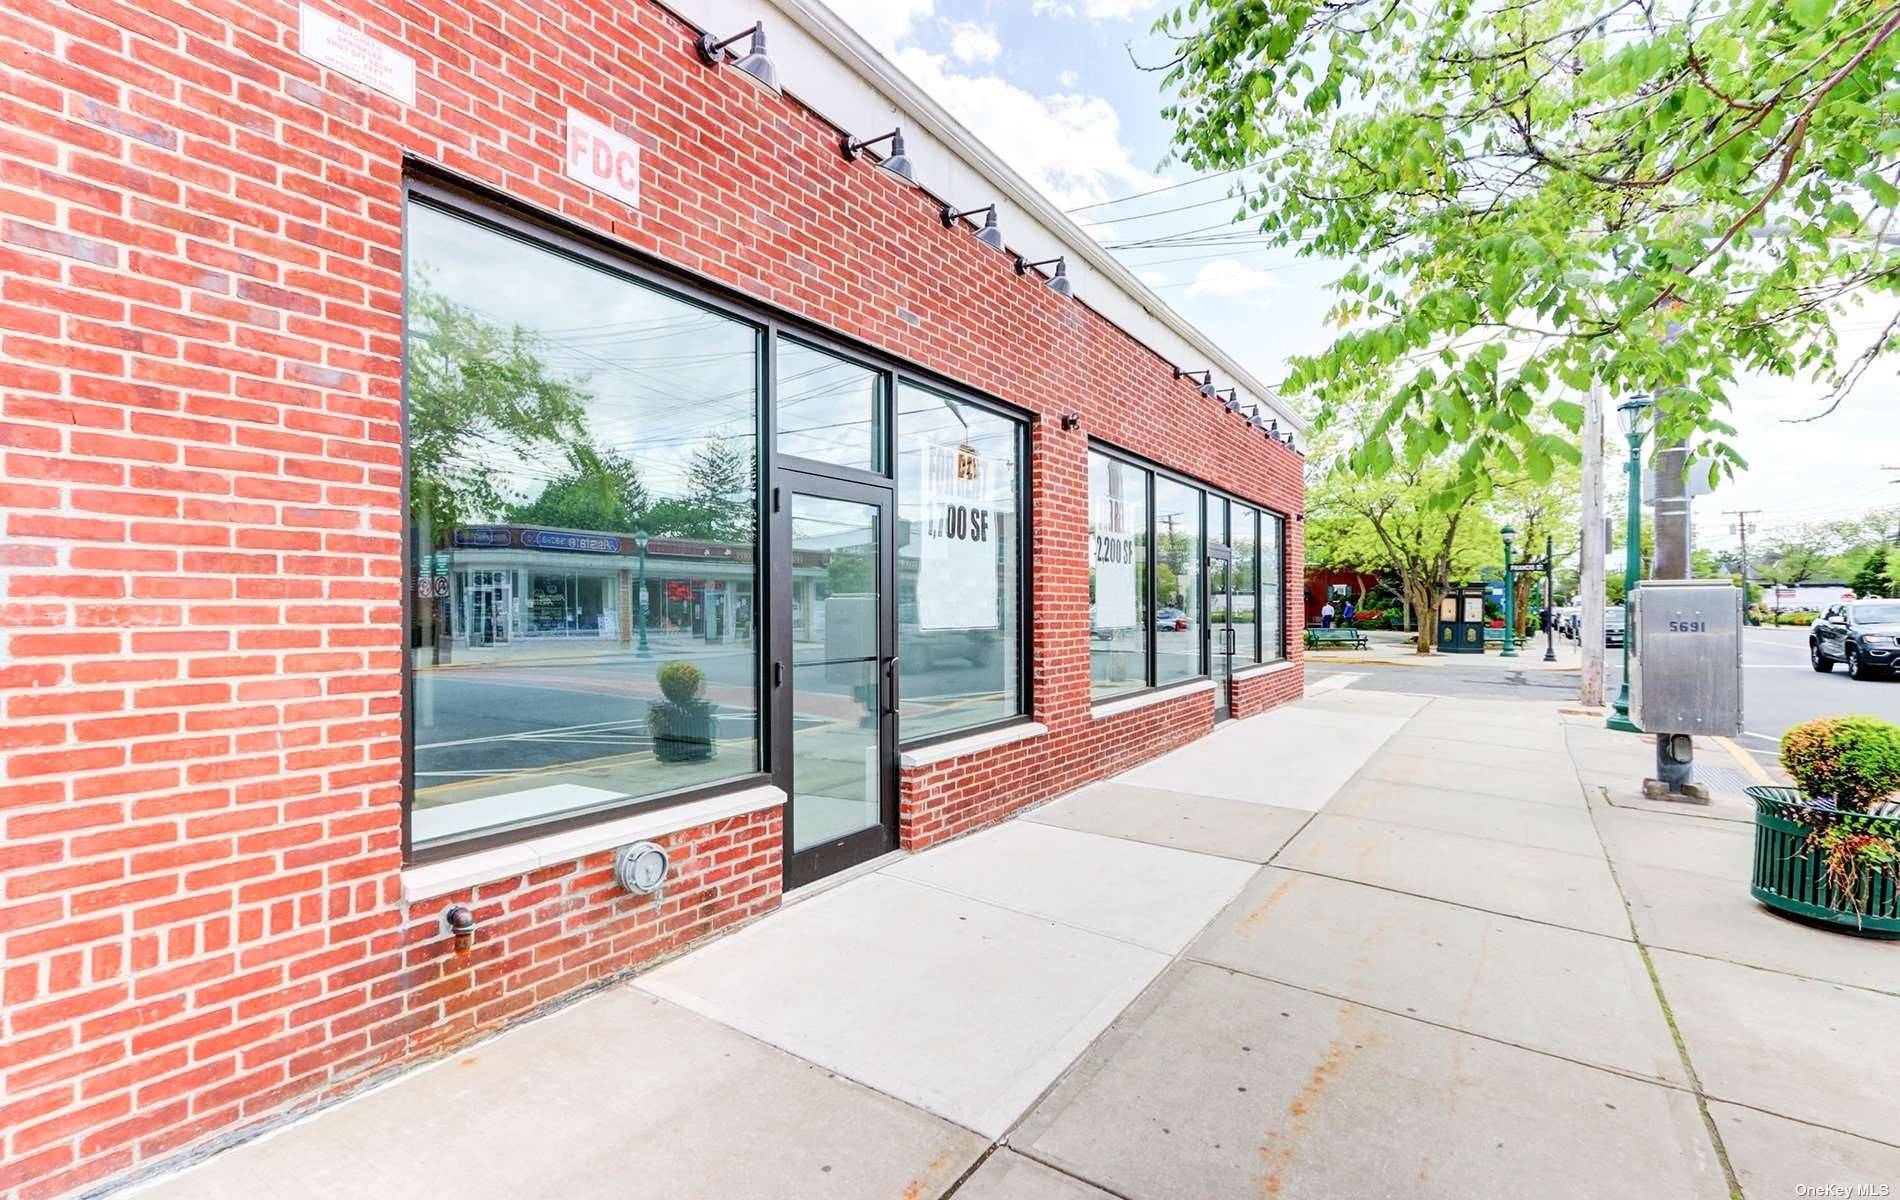 Impress your clients with this well maintained office space in the heart of Malverne.